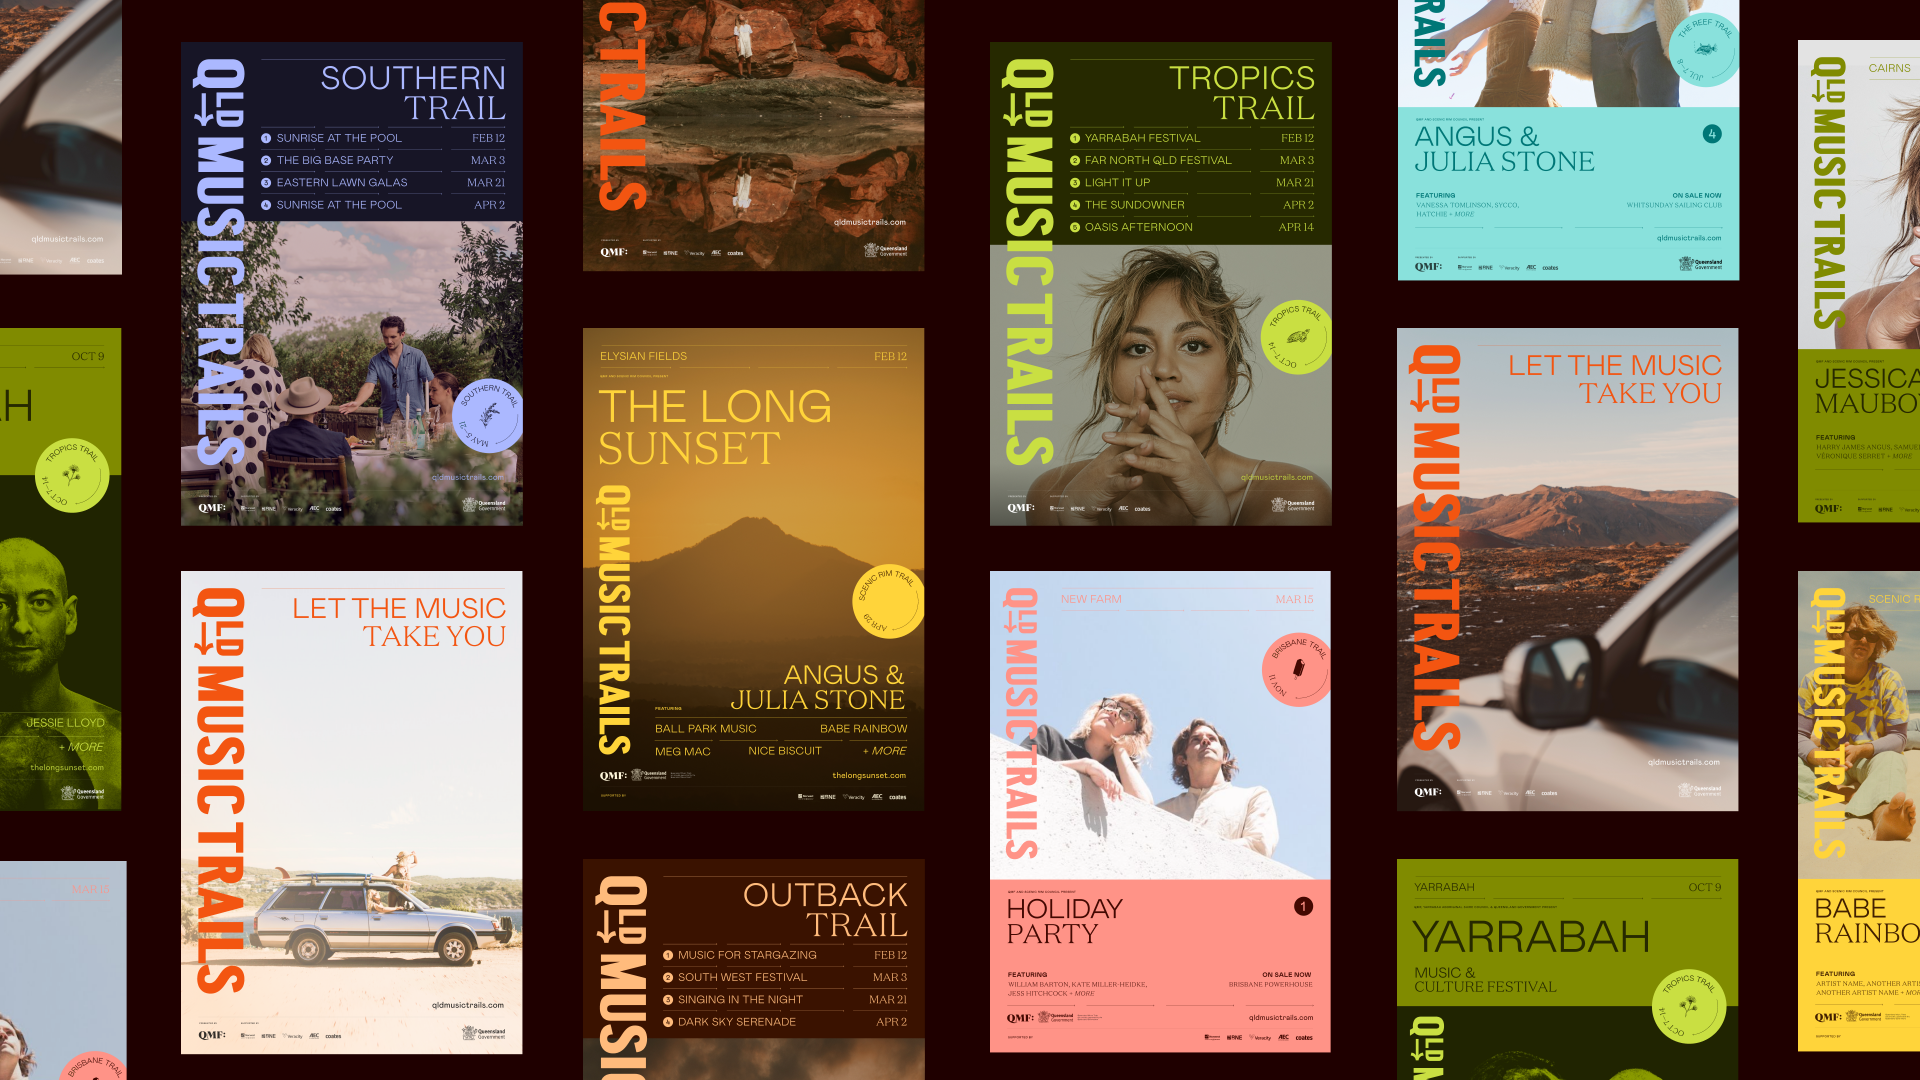 Collection of posters designed for the Trails brand